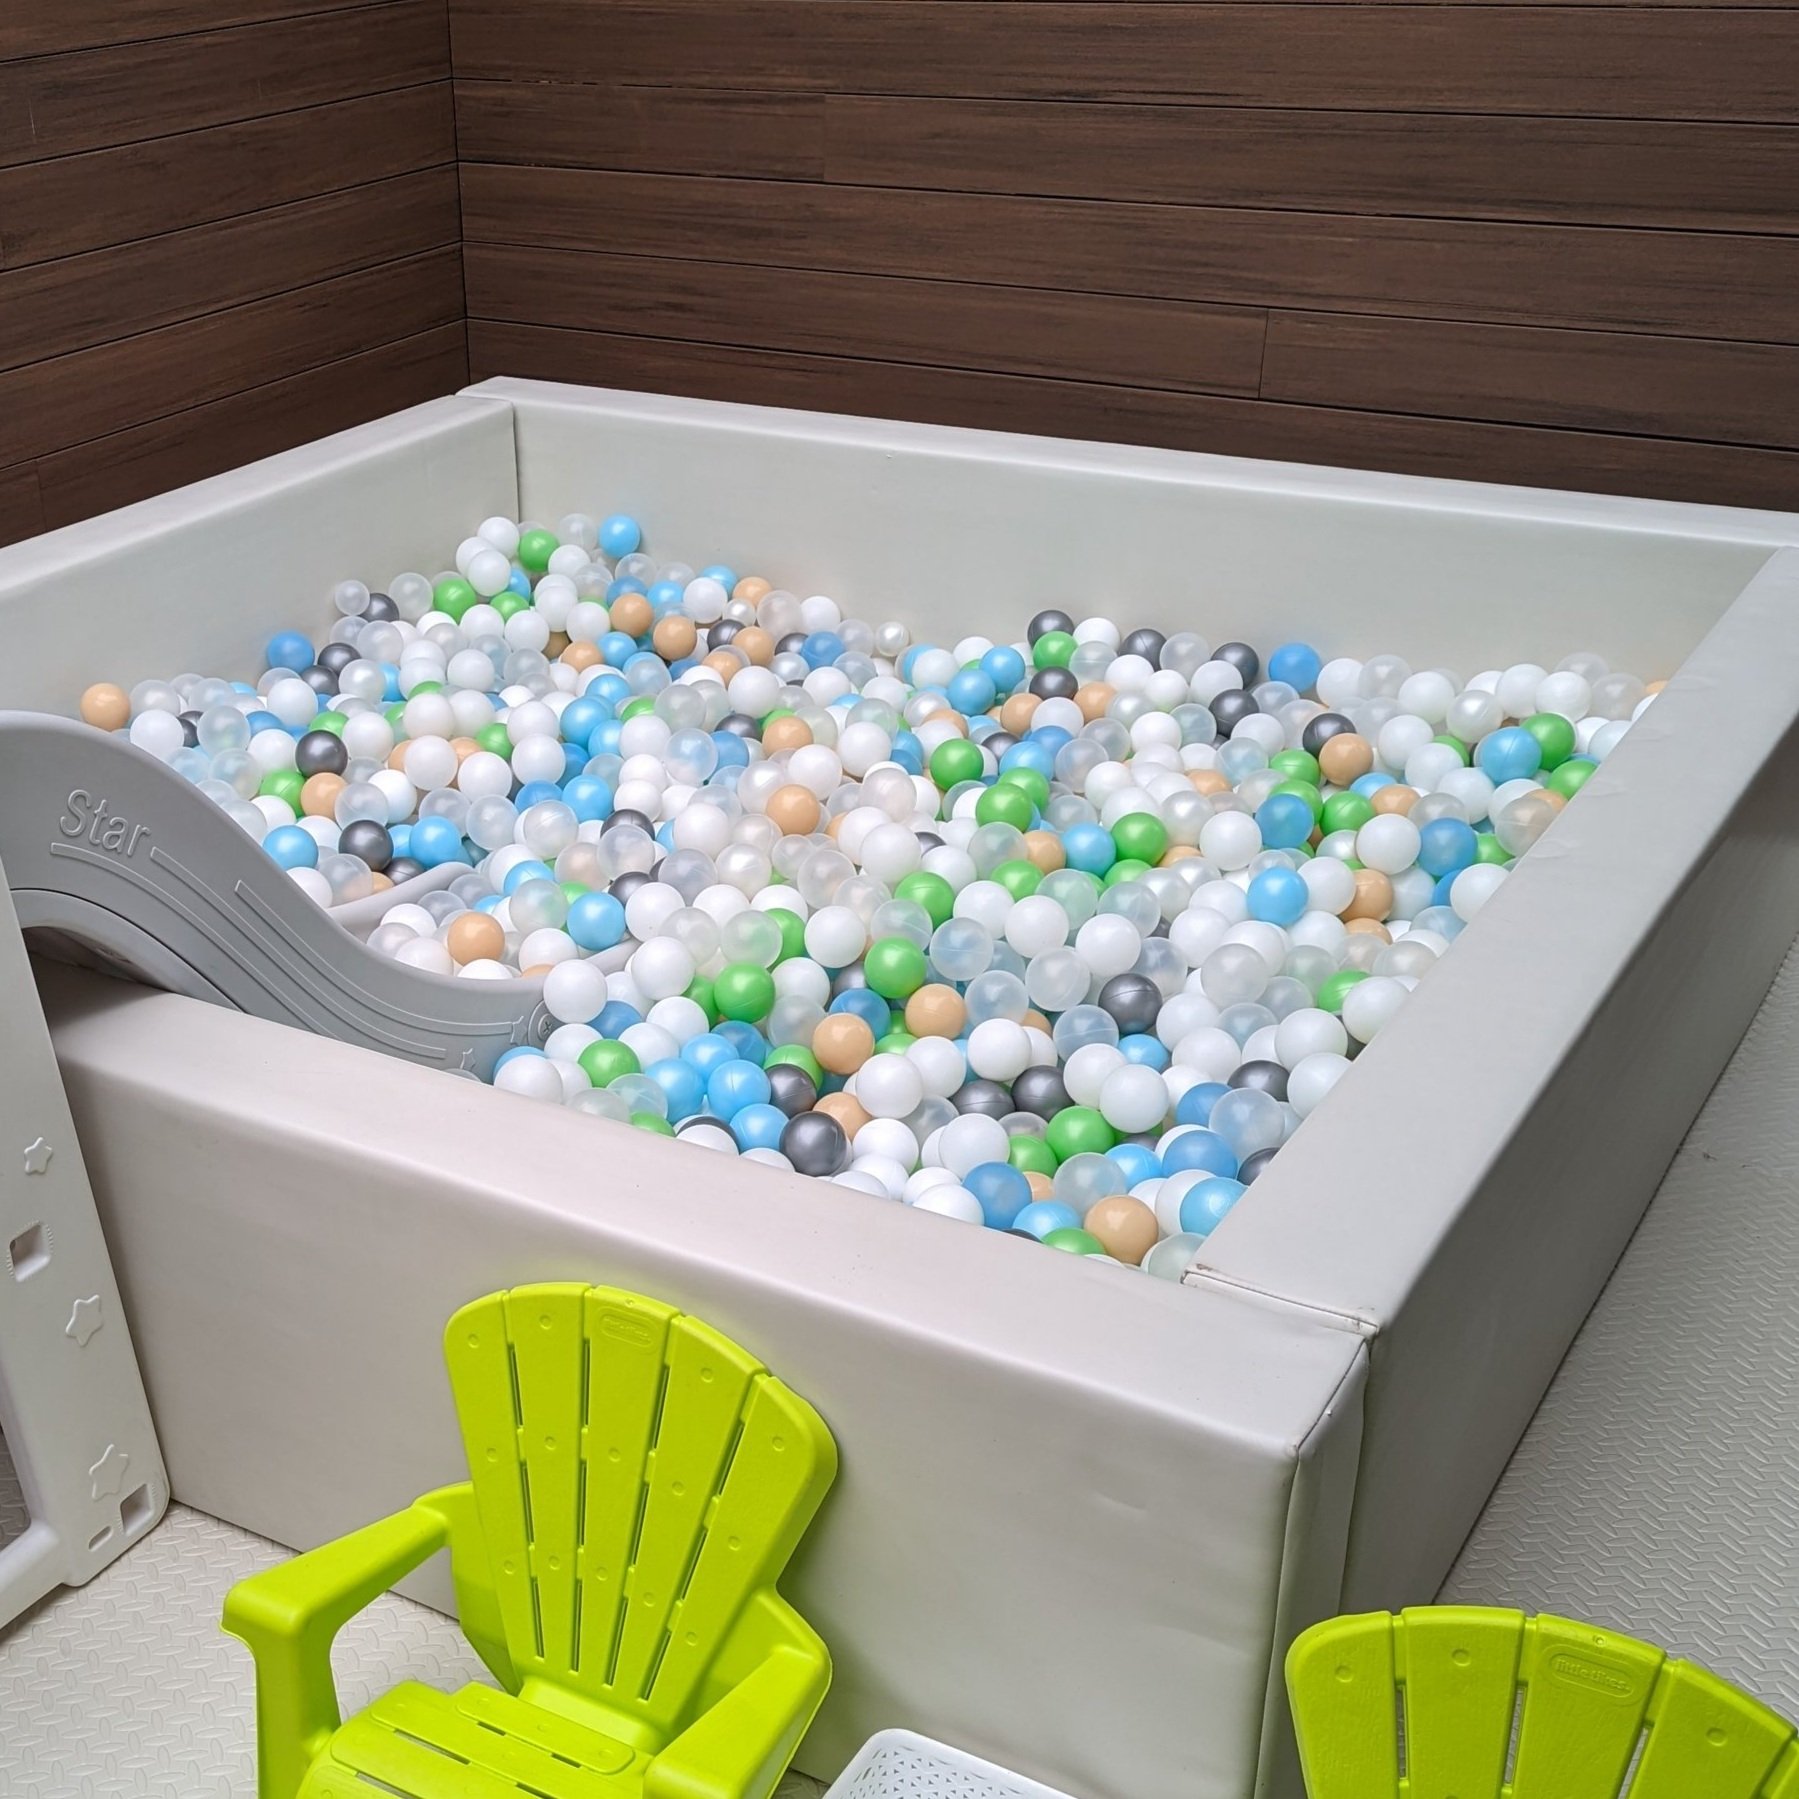 White Ball Pit Hire - Fun HQ  Ball pit party, Ball pit, Ball pit with slide